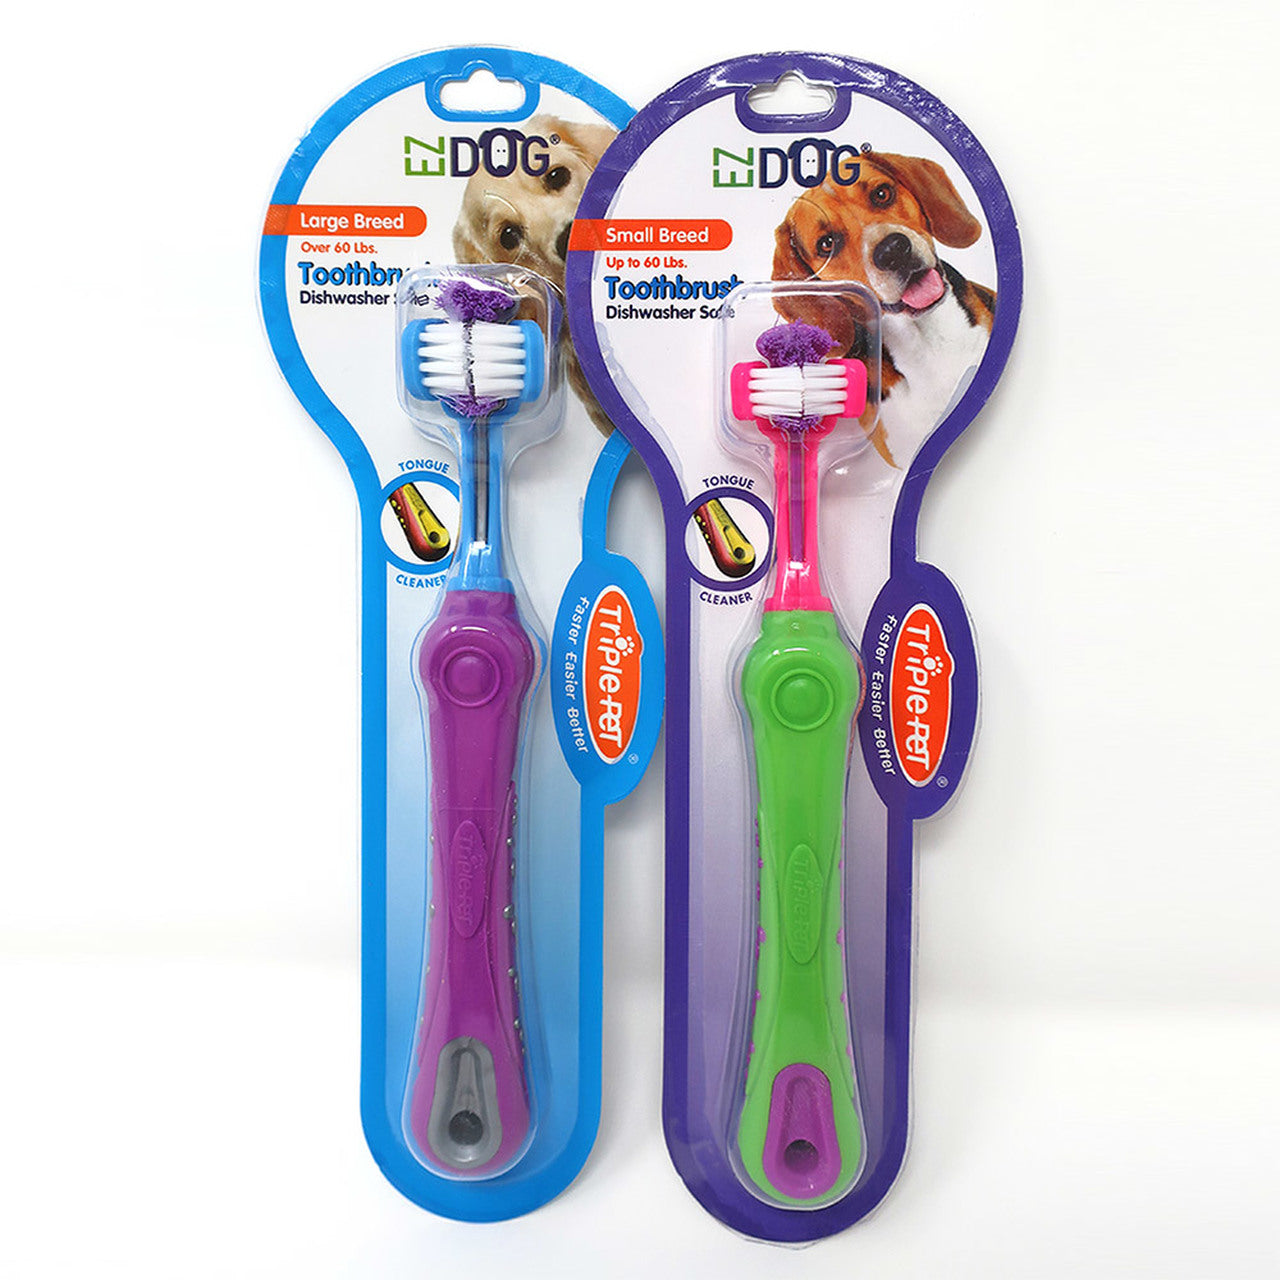 Triple Pet - Toothbrush - Chubbs Bars, Grooming Accessories - pet shampoo, Woofur Natural Pet Products - Chubbs Bars Company, Woofur Natural Pet Products - Chubbs Bars Canada